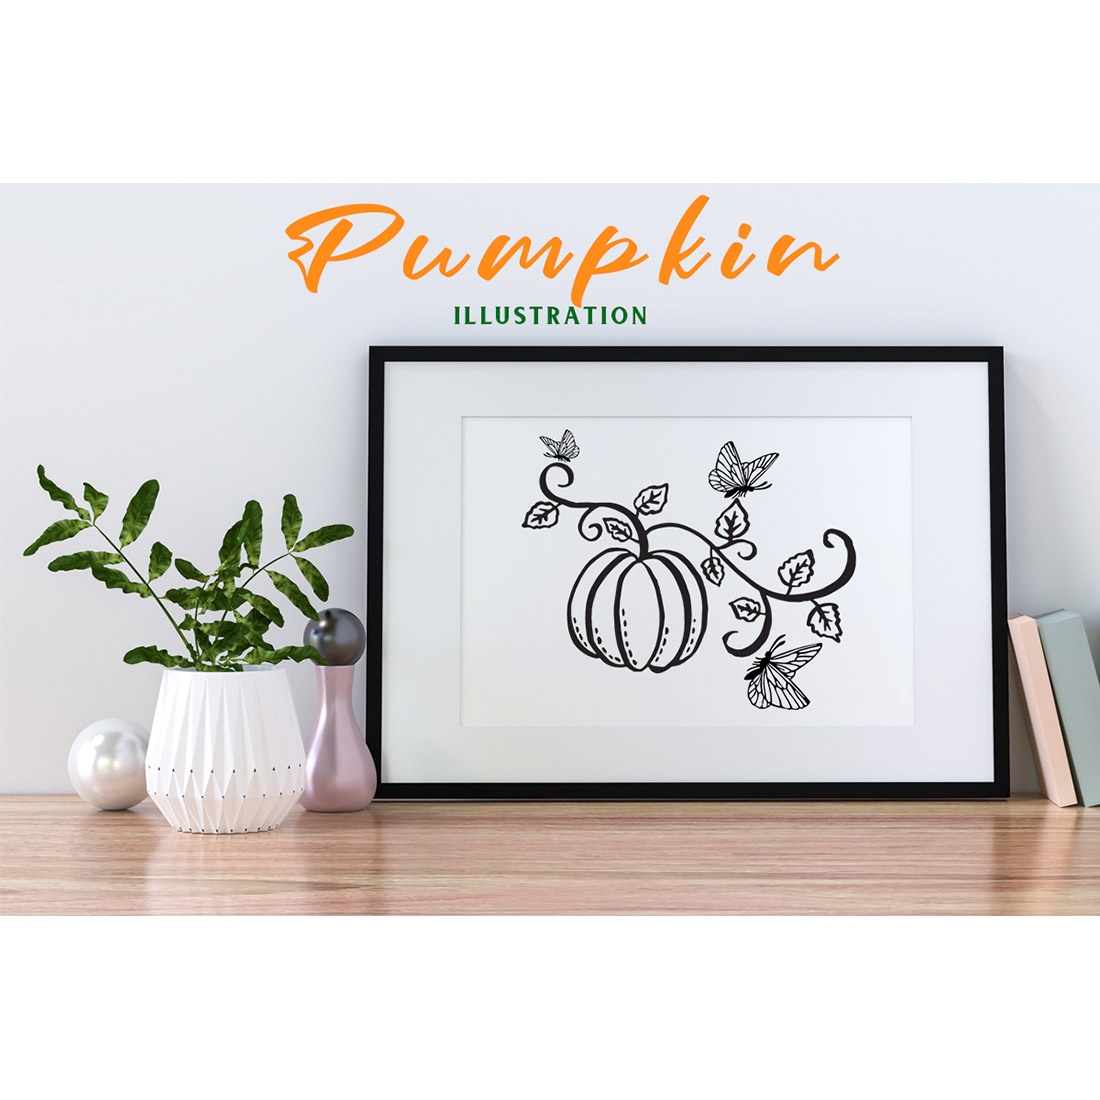 Gorgeous picture of a pumpkin in a frame